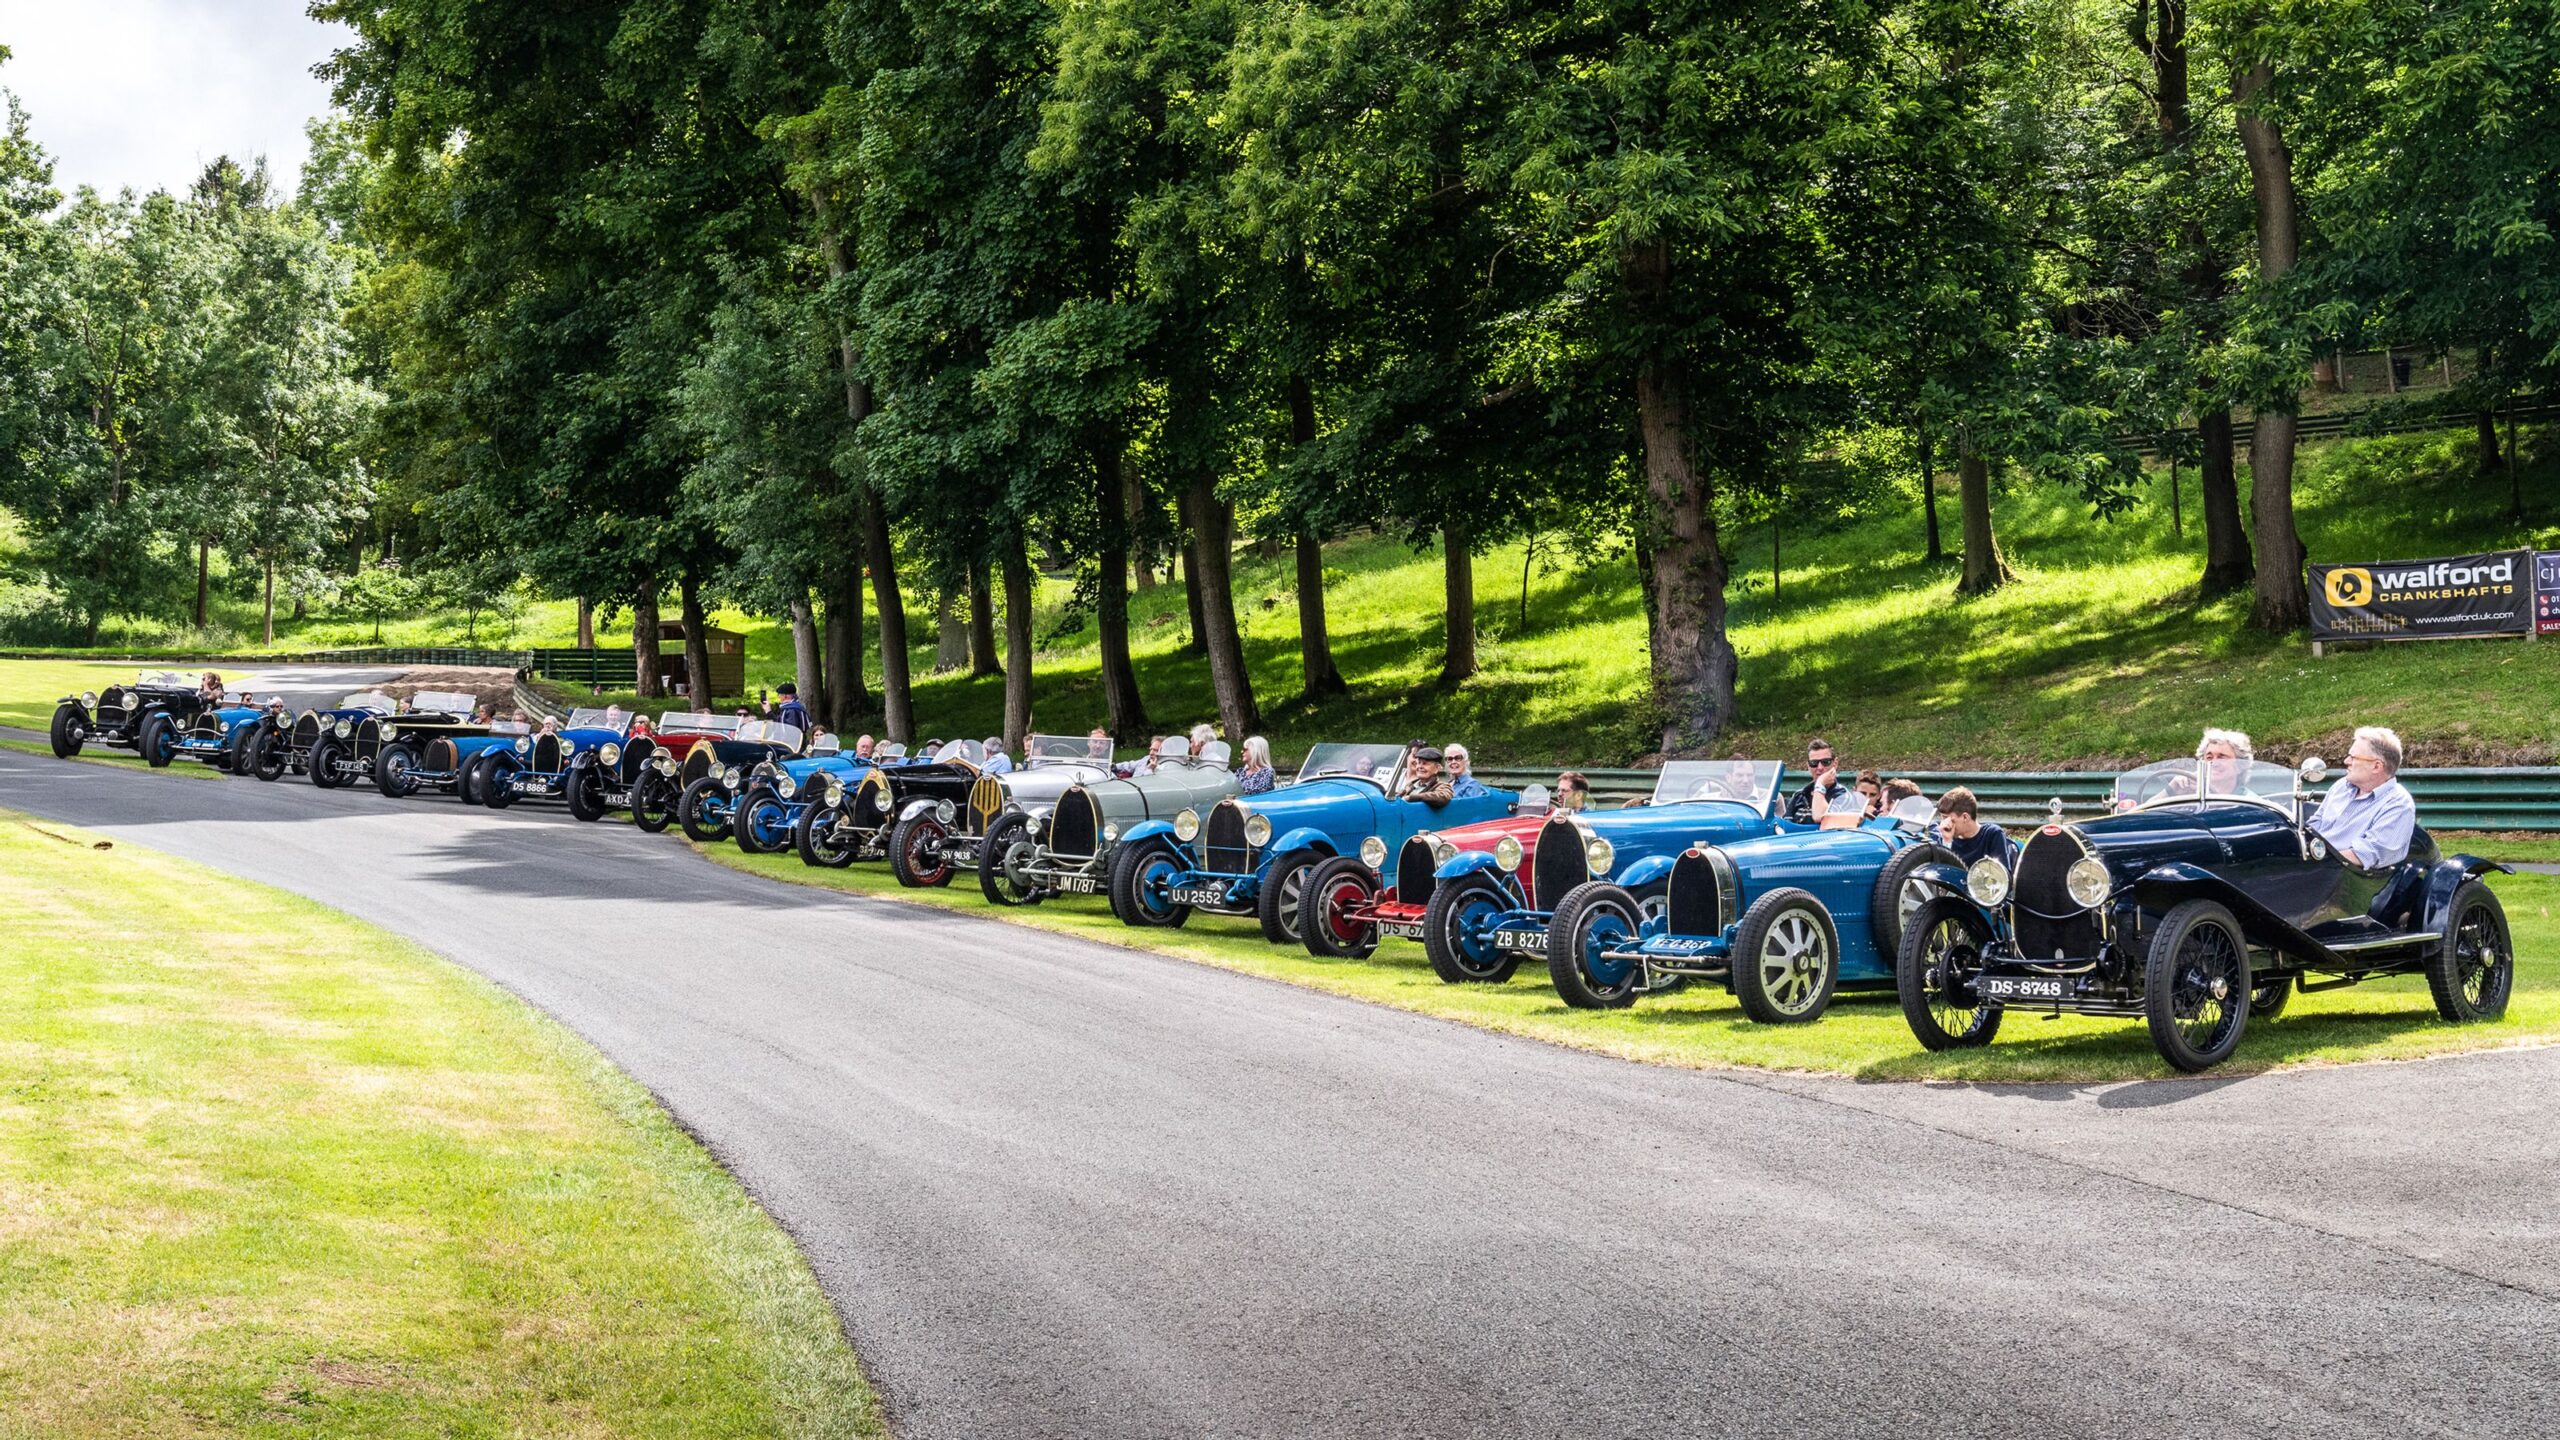 The Spiritual Home Of Bugatti In England For More Than 90 Years